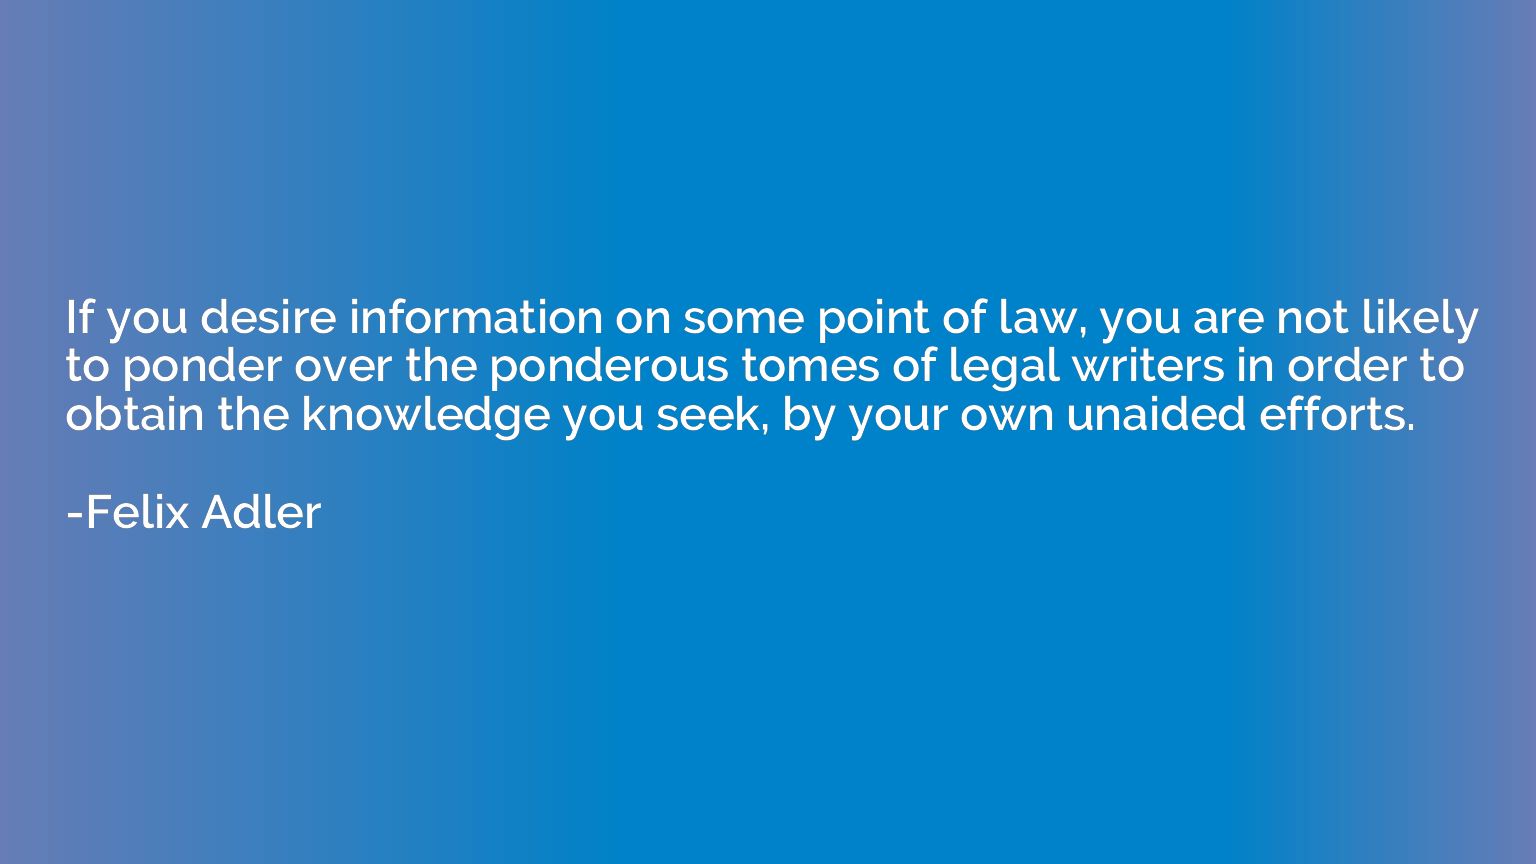 If you desire information on some point of law, you are not 